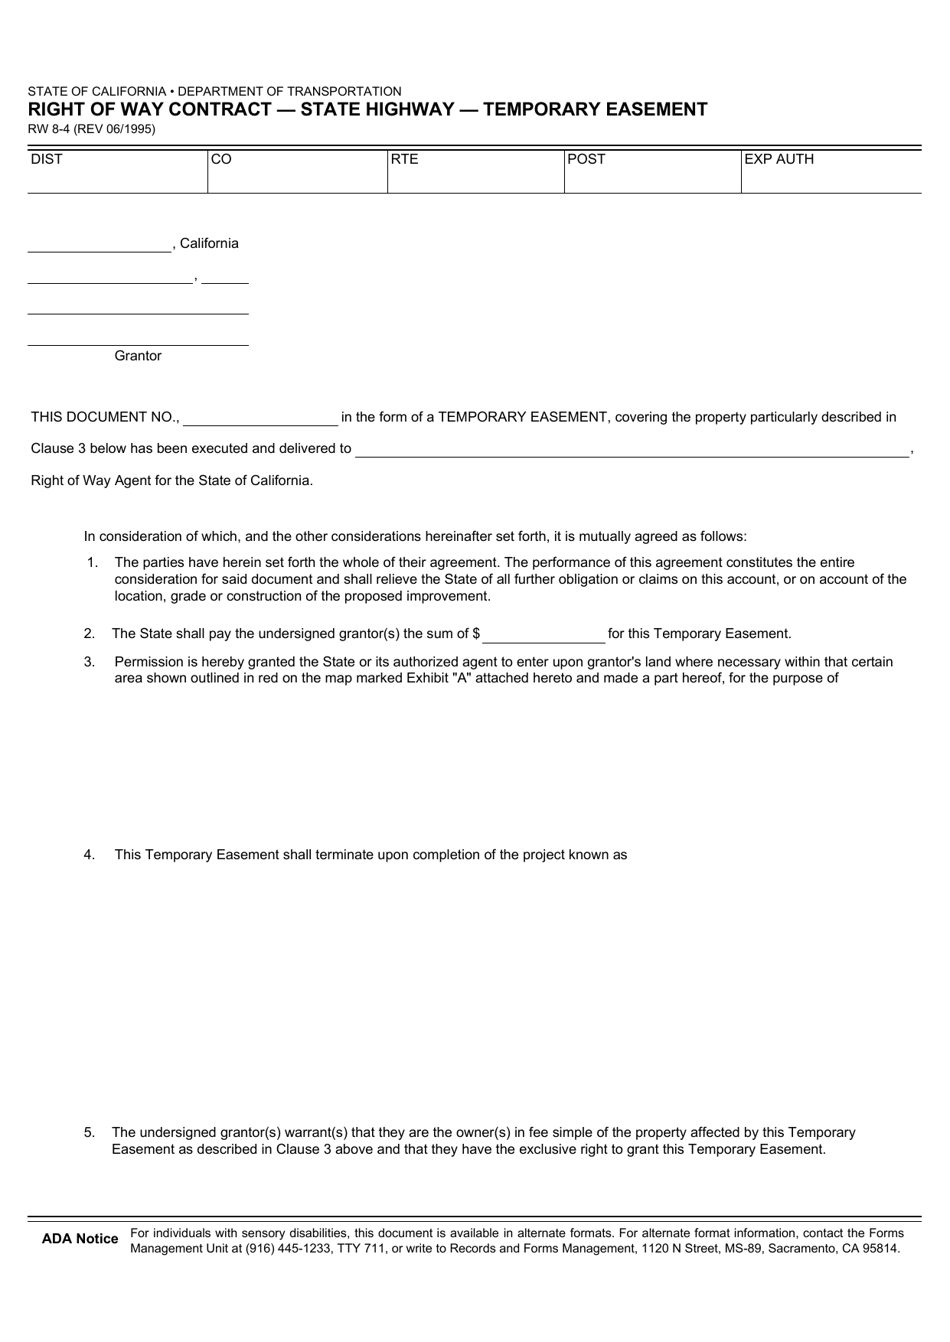 Form RW8-4 Right of Way Contract - State Highway - Temporary Easement - California, Page 1